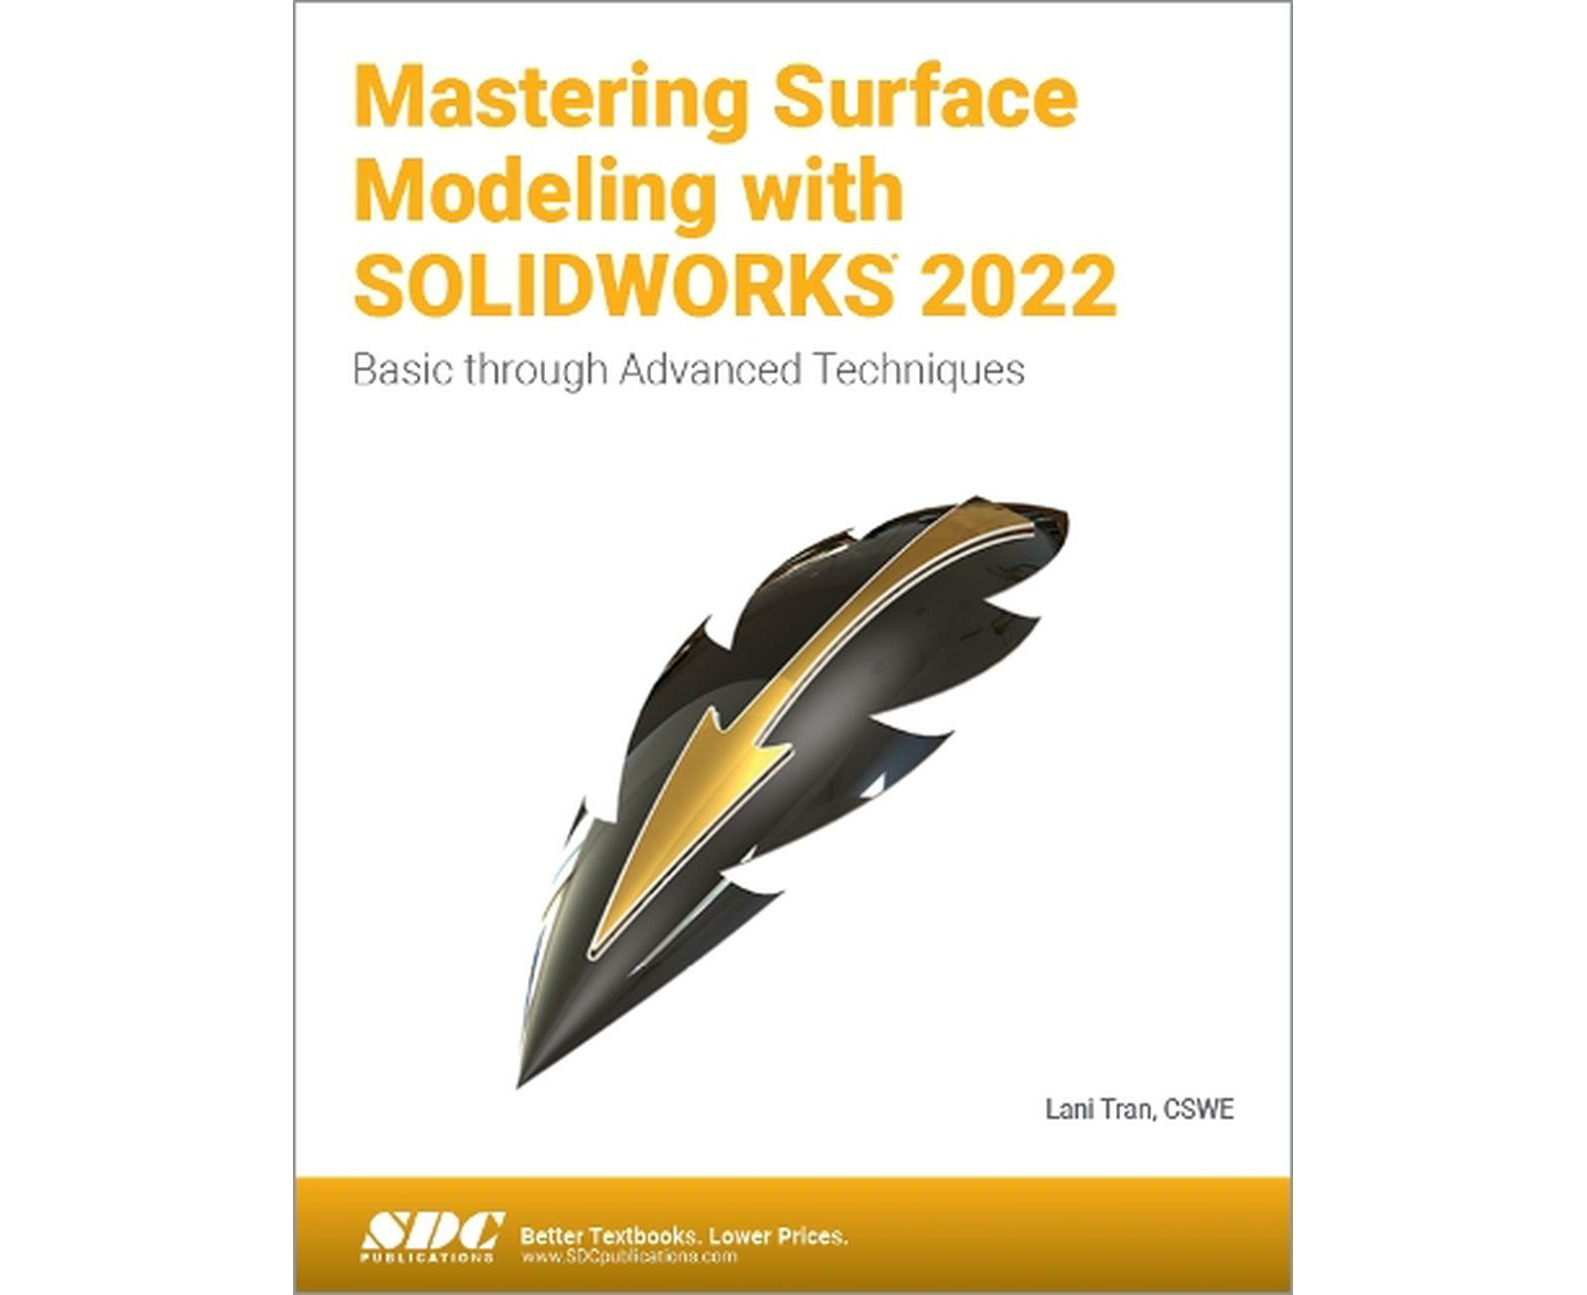 The Complete Guide to Mold Making with SOLIDWORKS 2022, Book